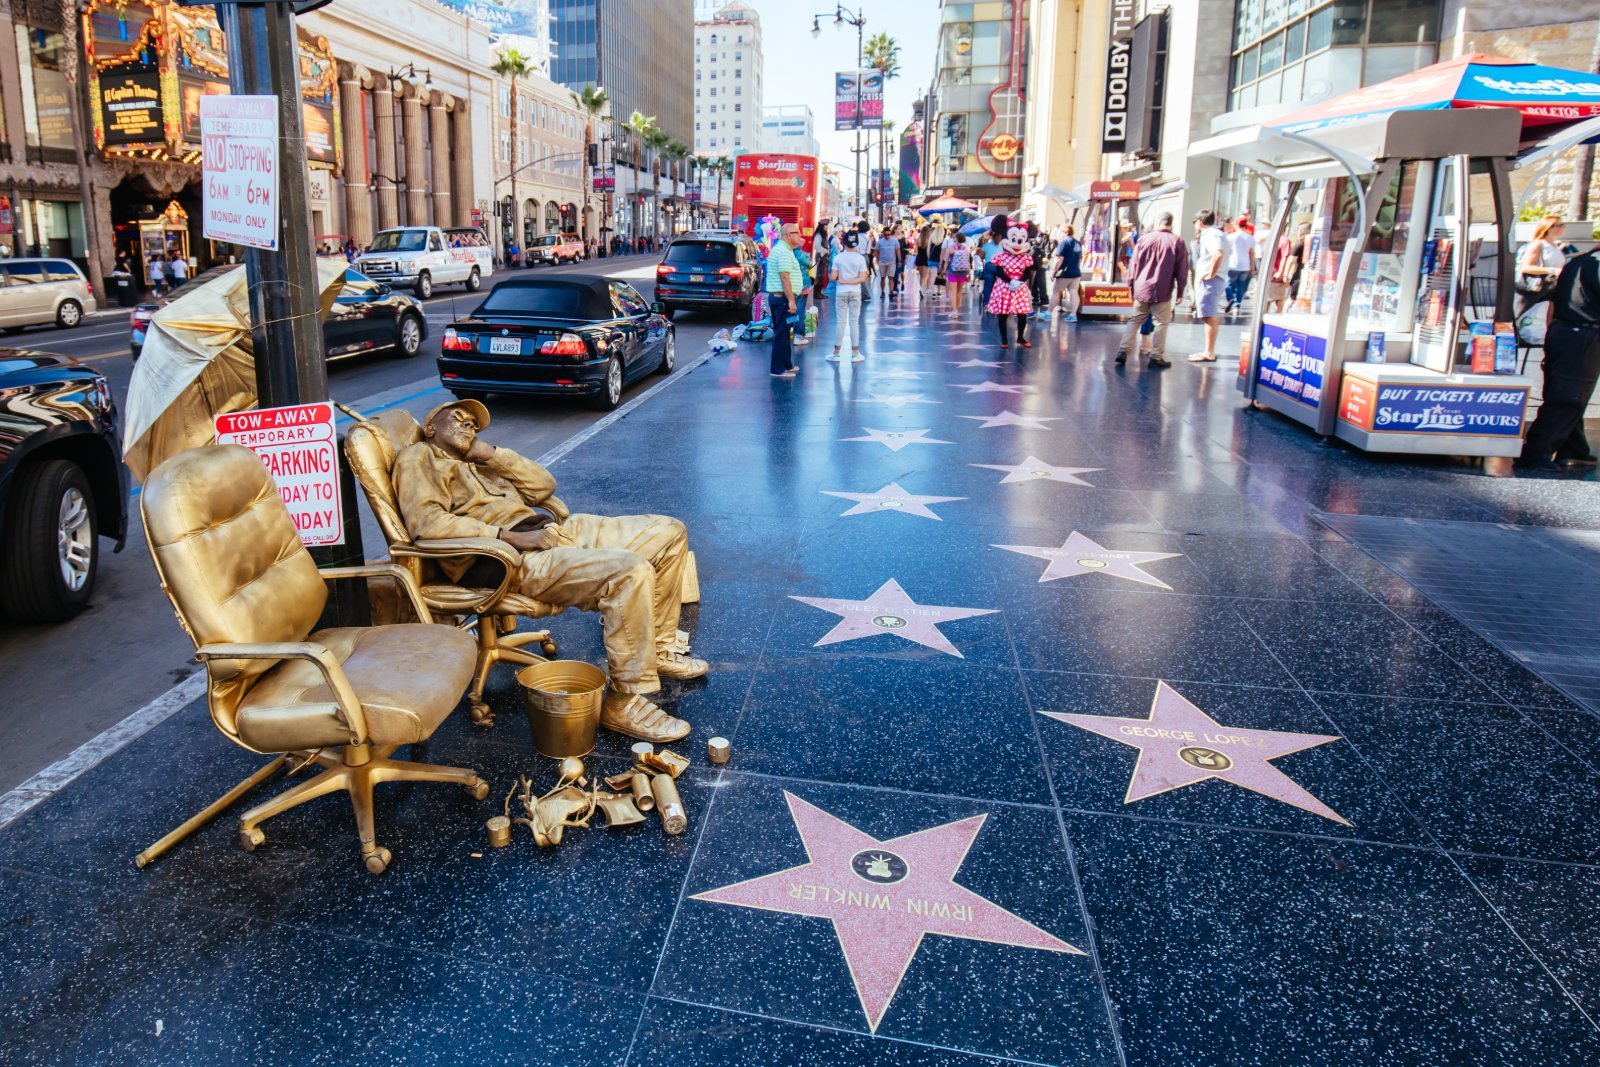 <p class="wp-caption-text">Image Credit: Shutterstock / FiledIMAGE</p>  <p>This famed stretch is more about dodging crowds and street vendors than experiencing the glam of Hollywood. The area is surprisingly commercial and lacks the glamour many expect.</p>